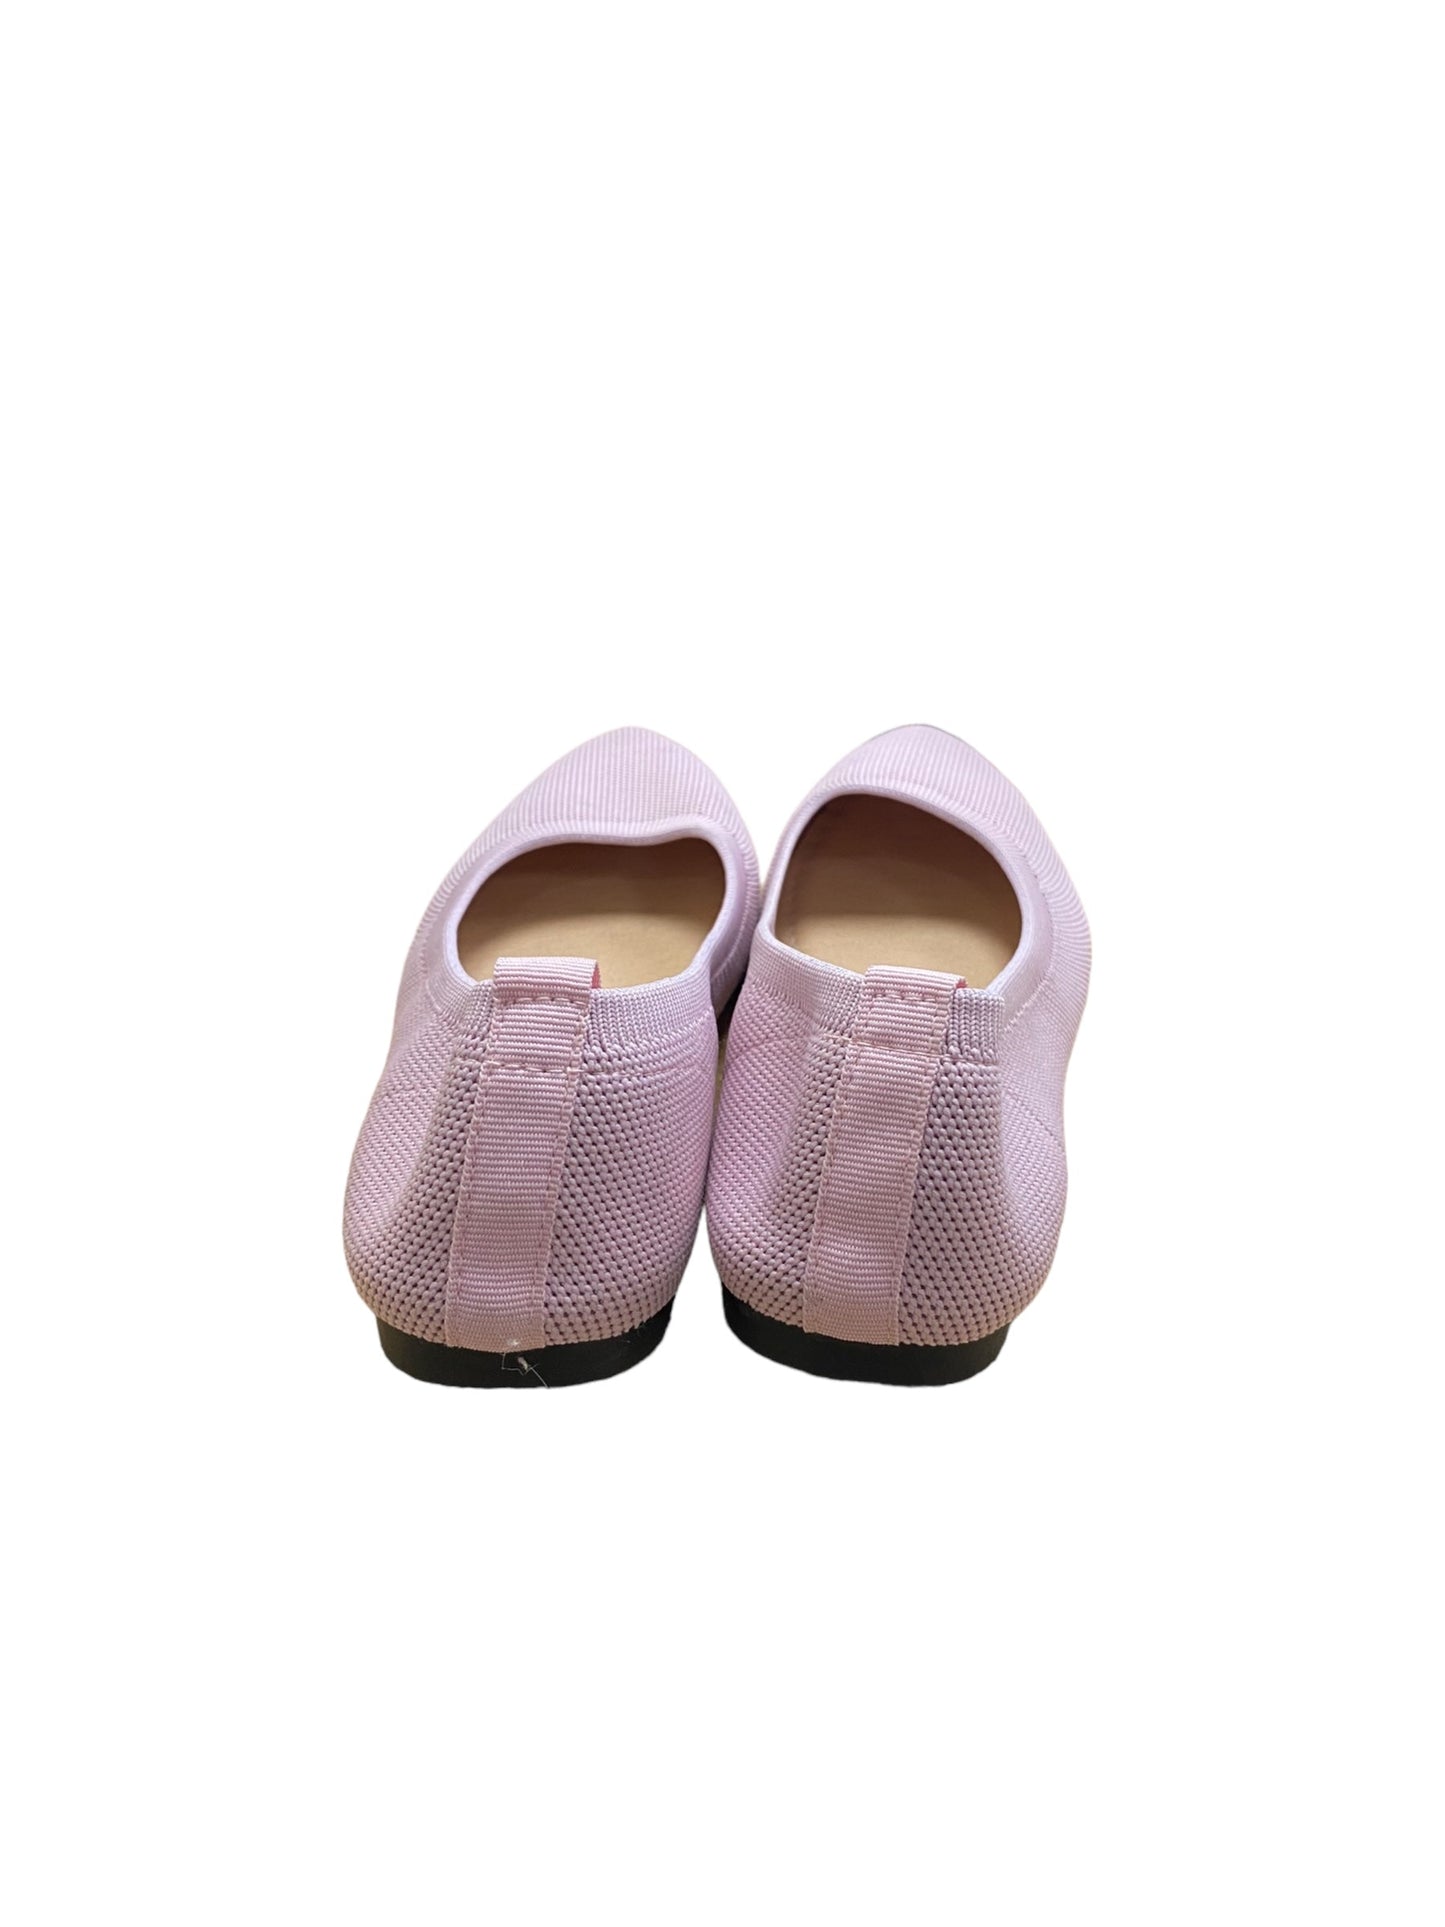 Pink Shoes Flats Clothes Mentor, Size 8